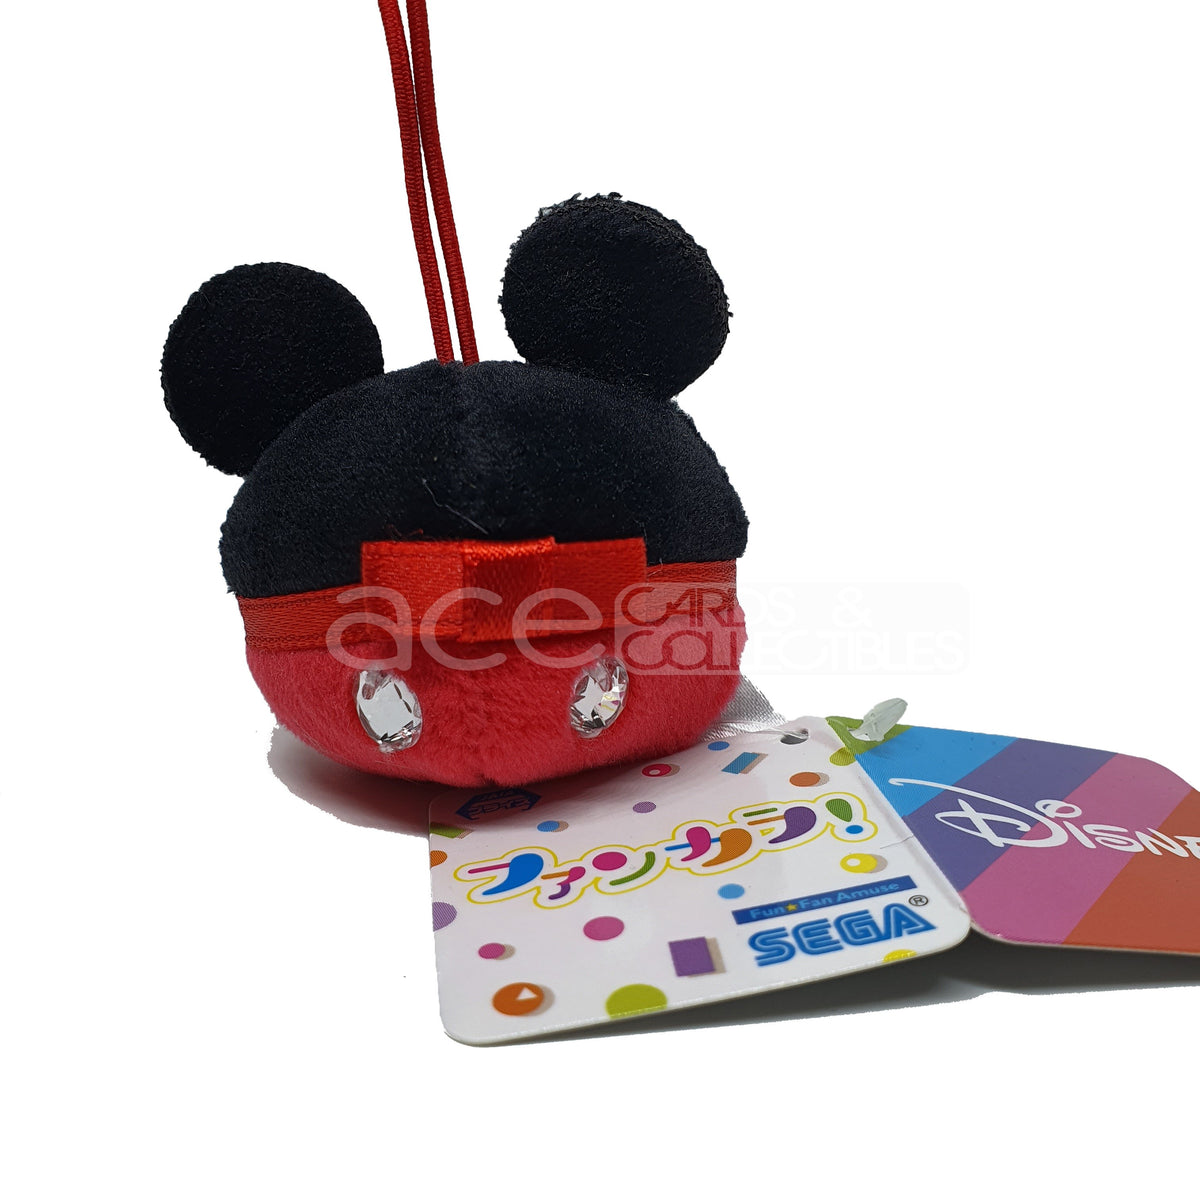 Disney Mickey Mouse Icon Keychain-Red-Sega-Ace Cards &amp; Collectibles